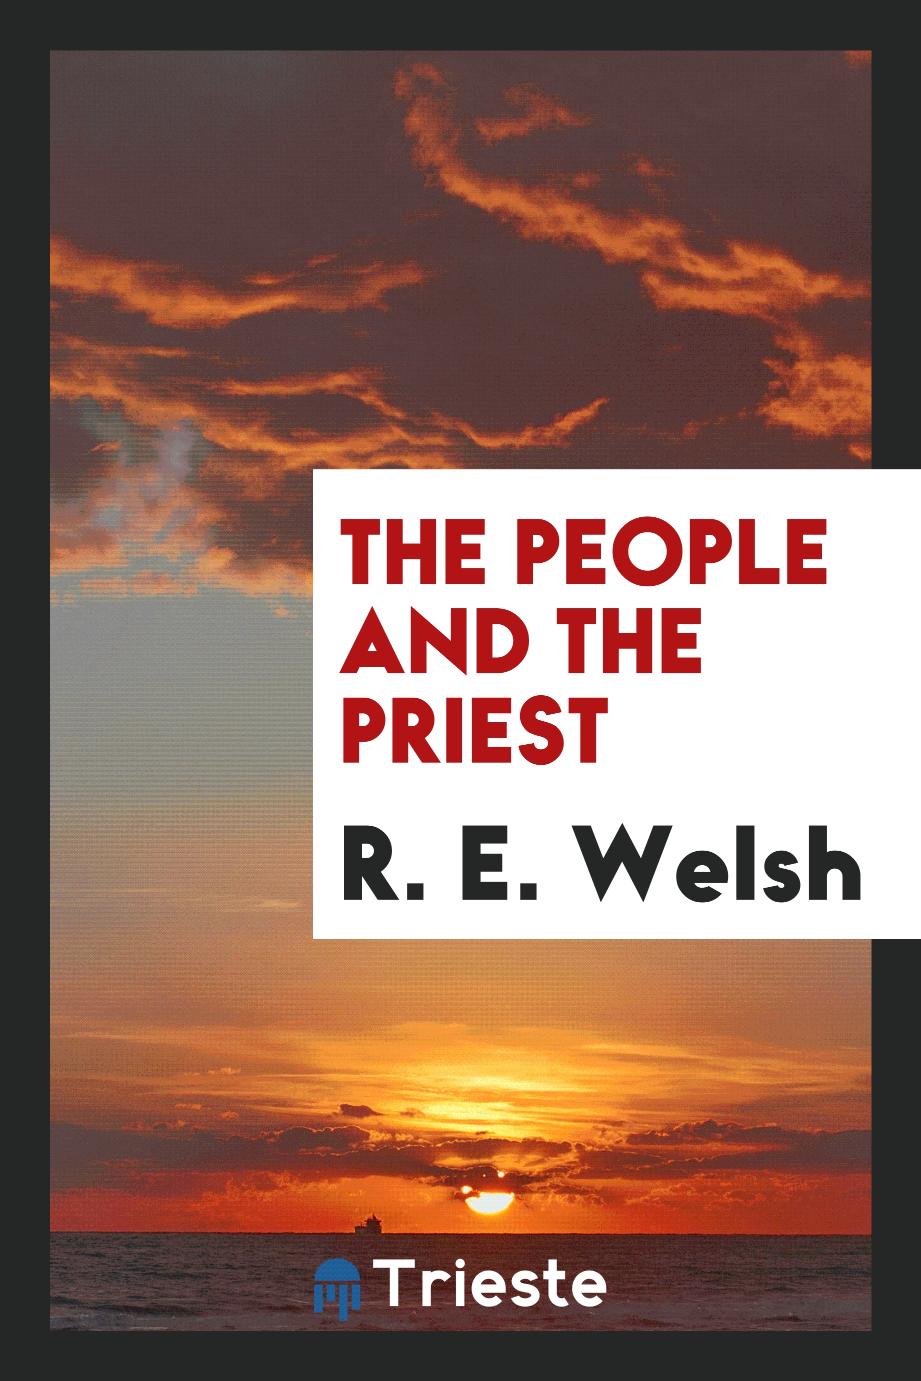 The people and the priest